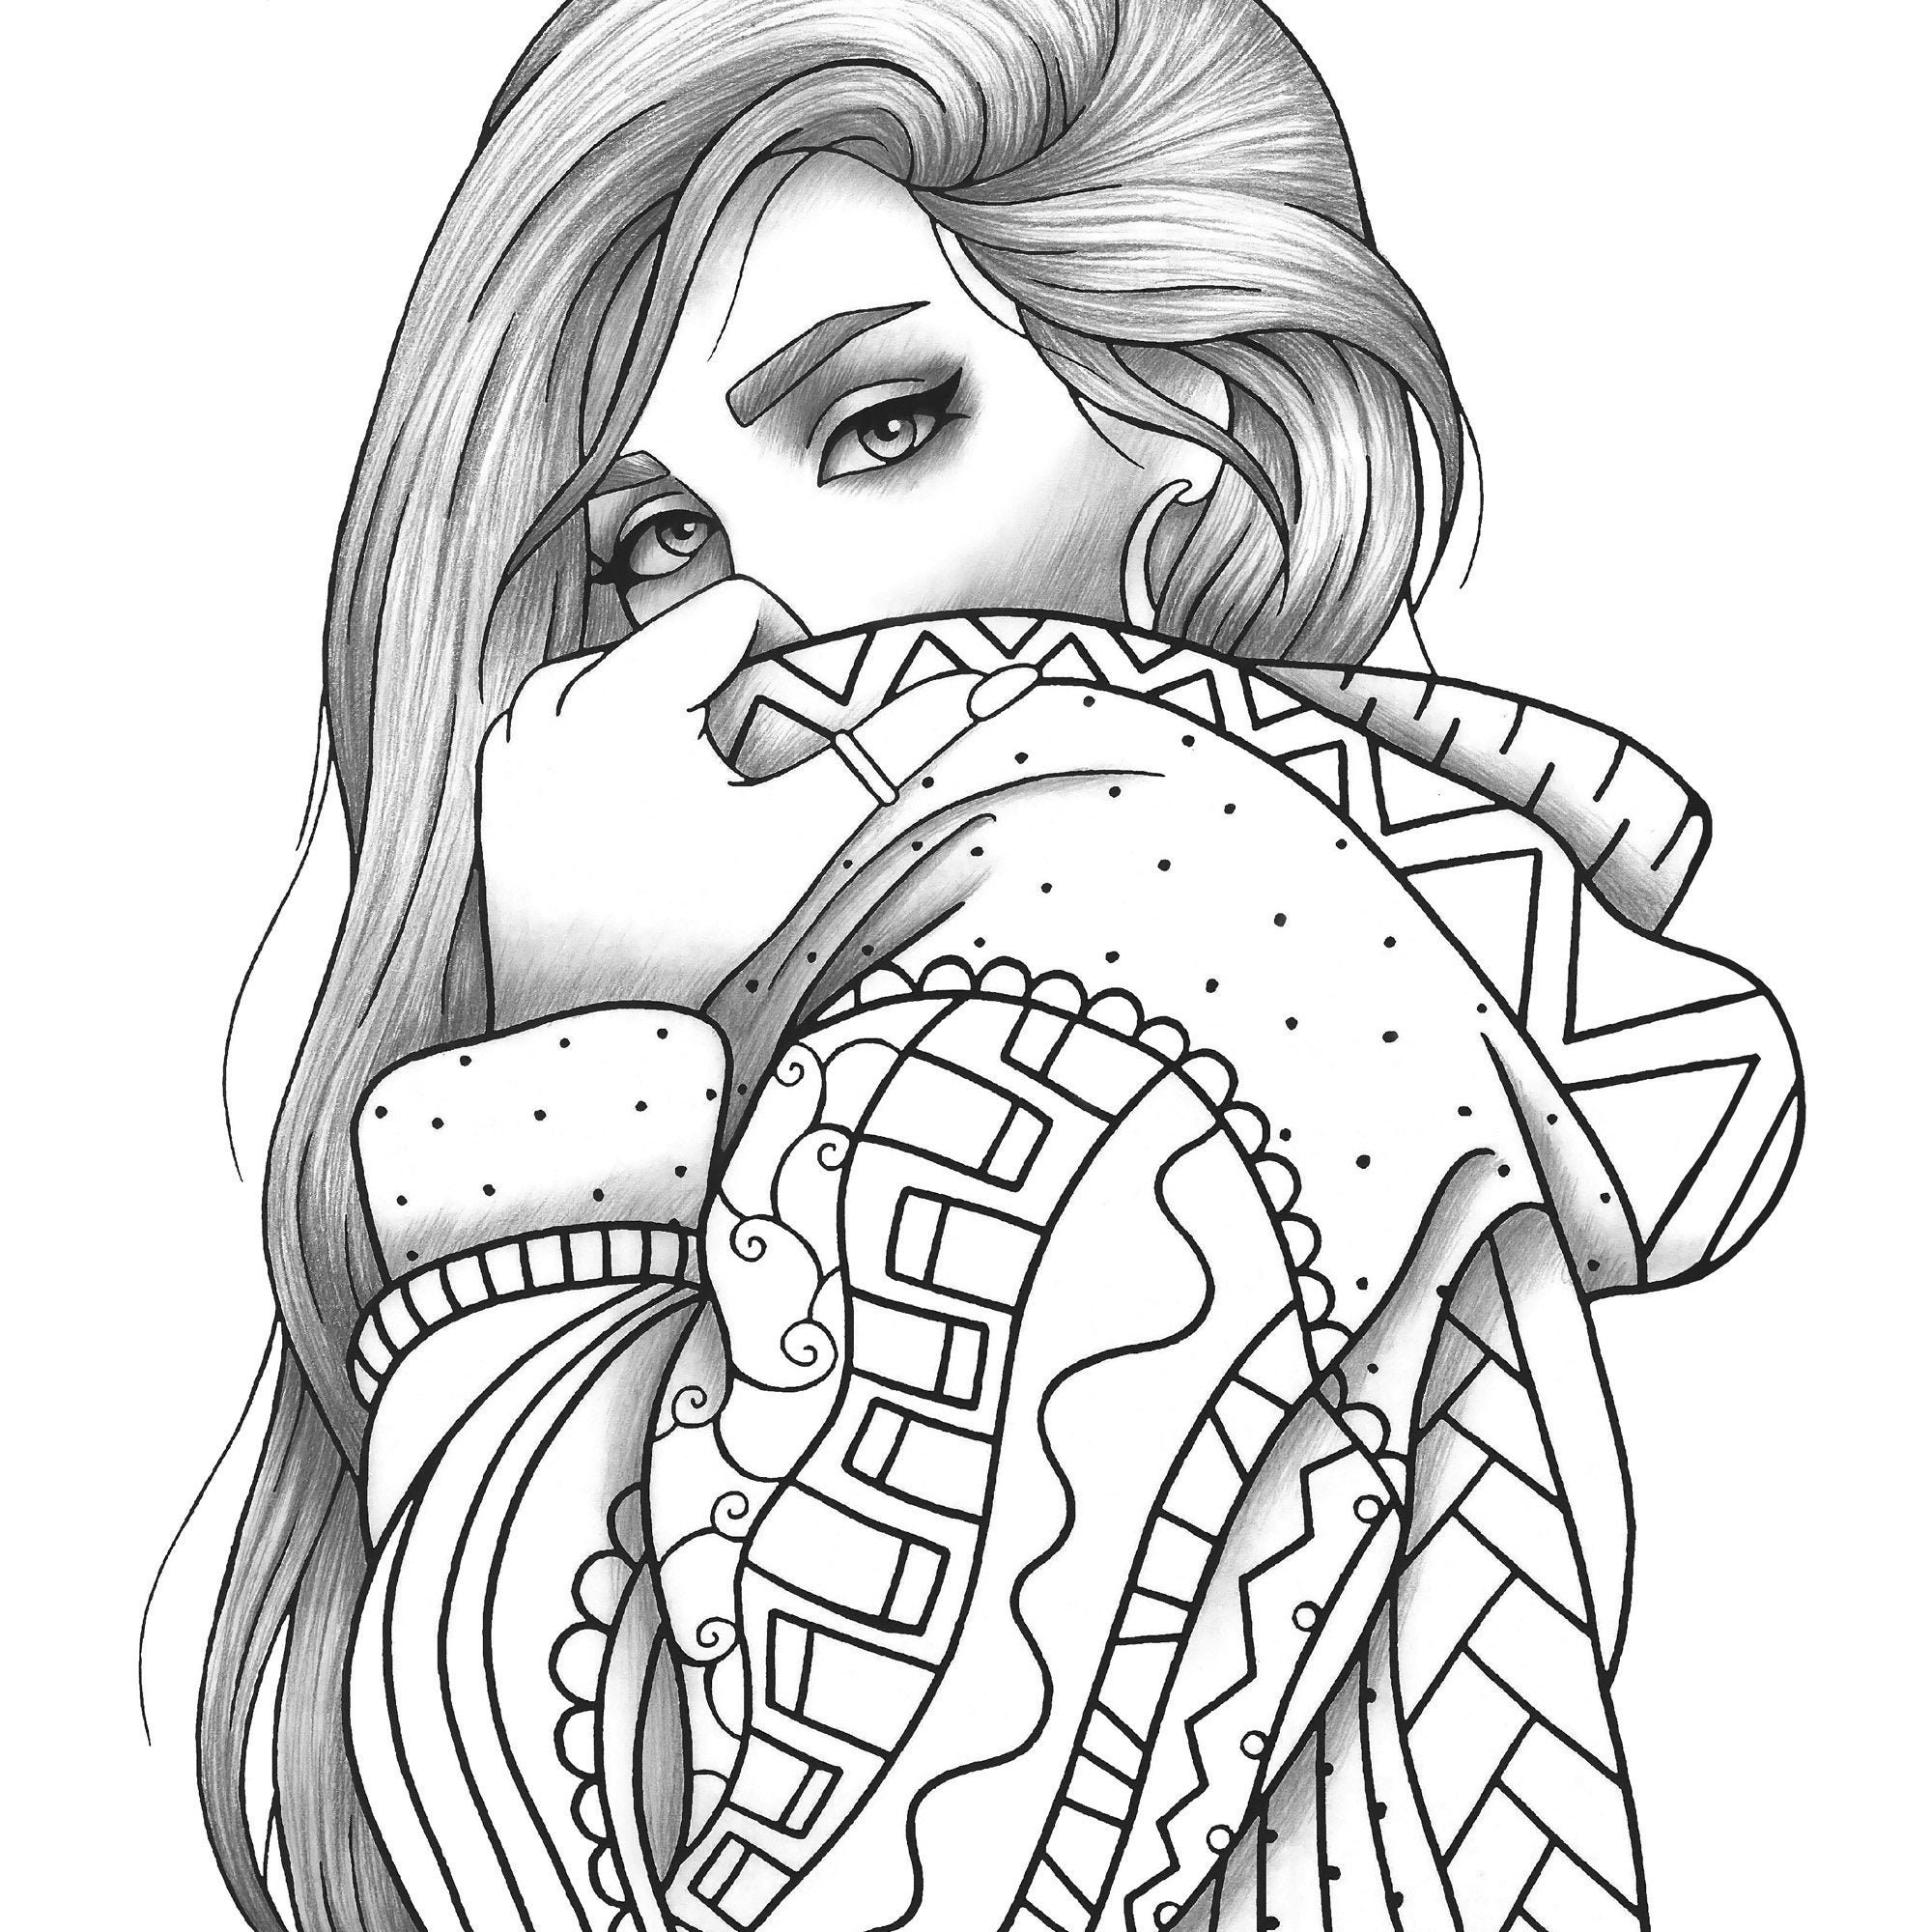 Adult coloring page girl portrait and clothes colouring sheet   Etsy